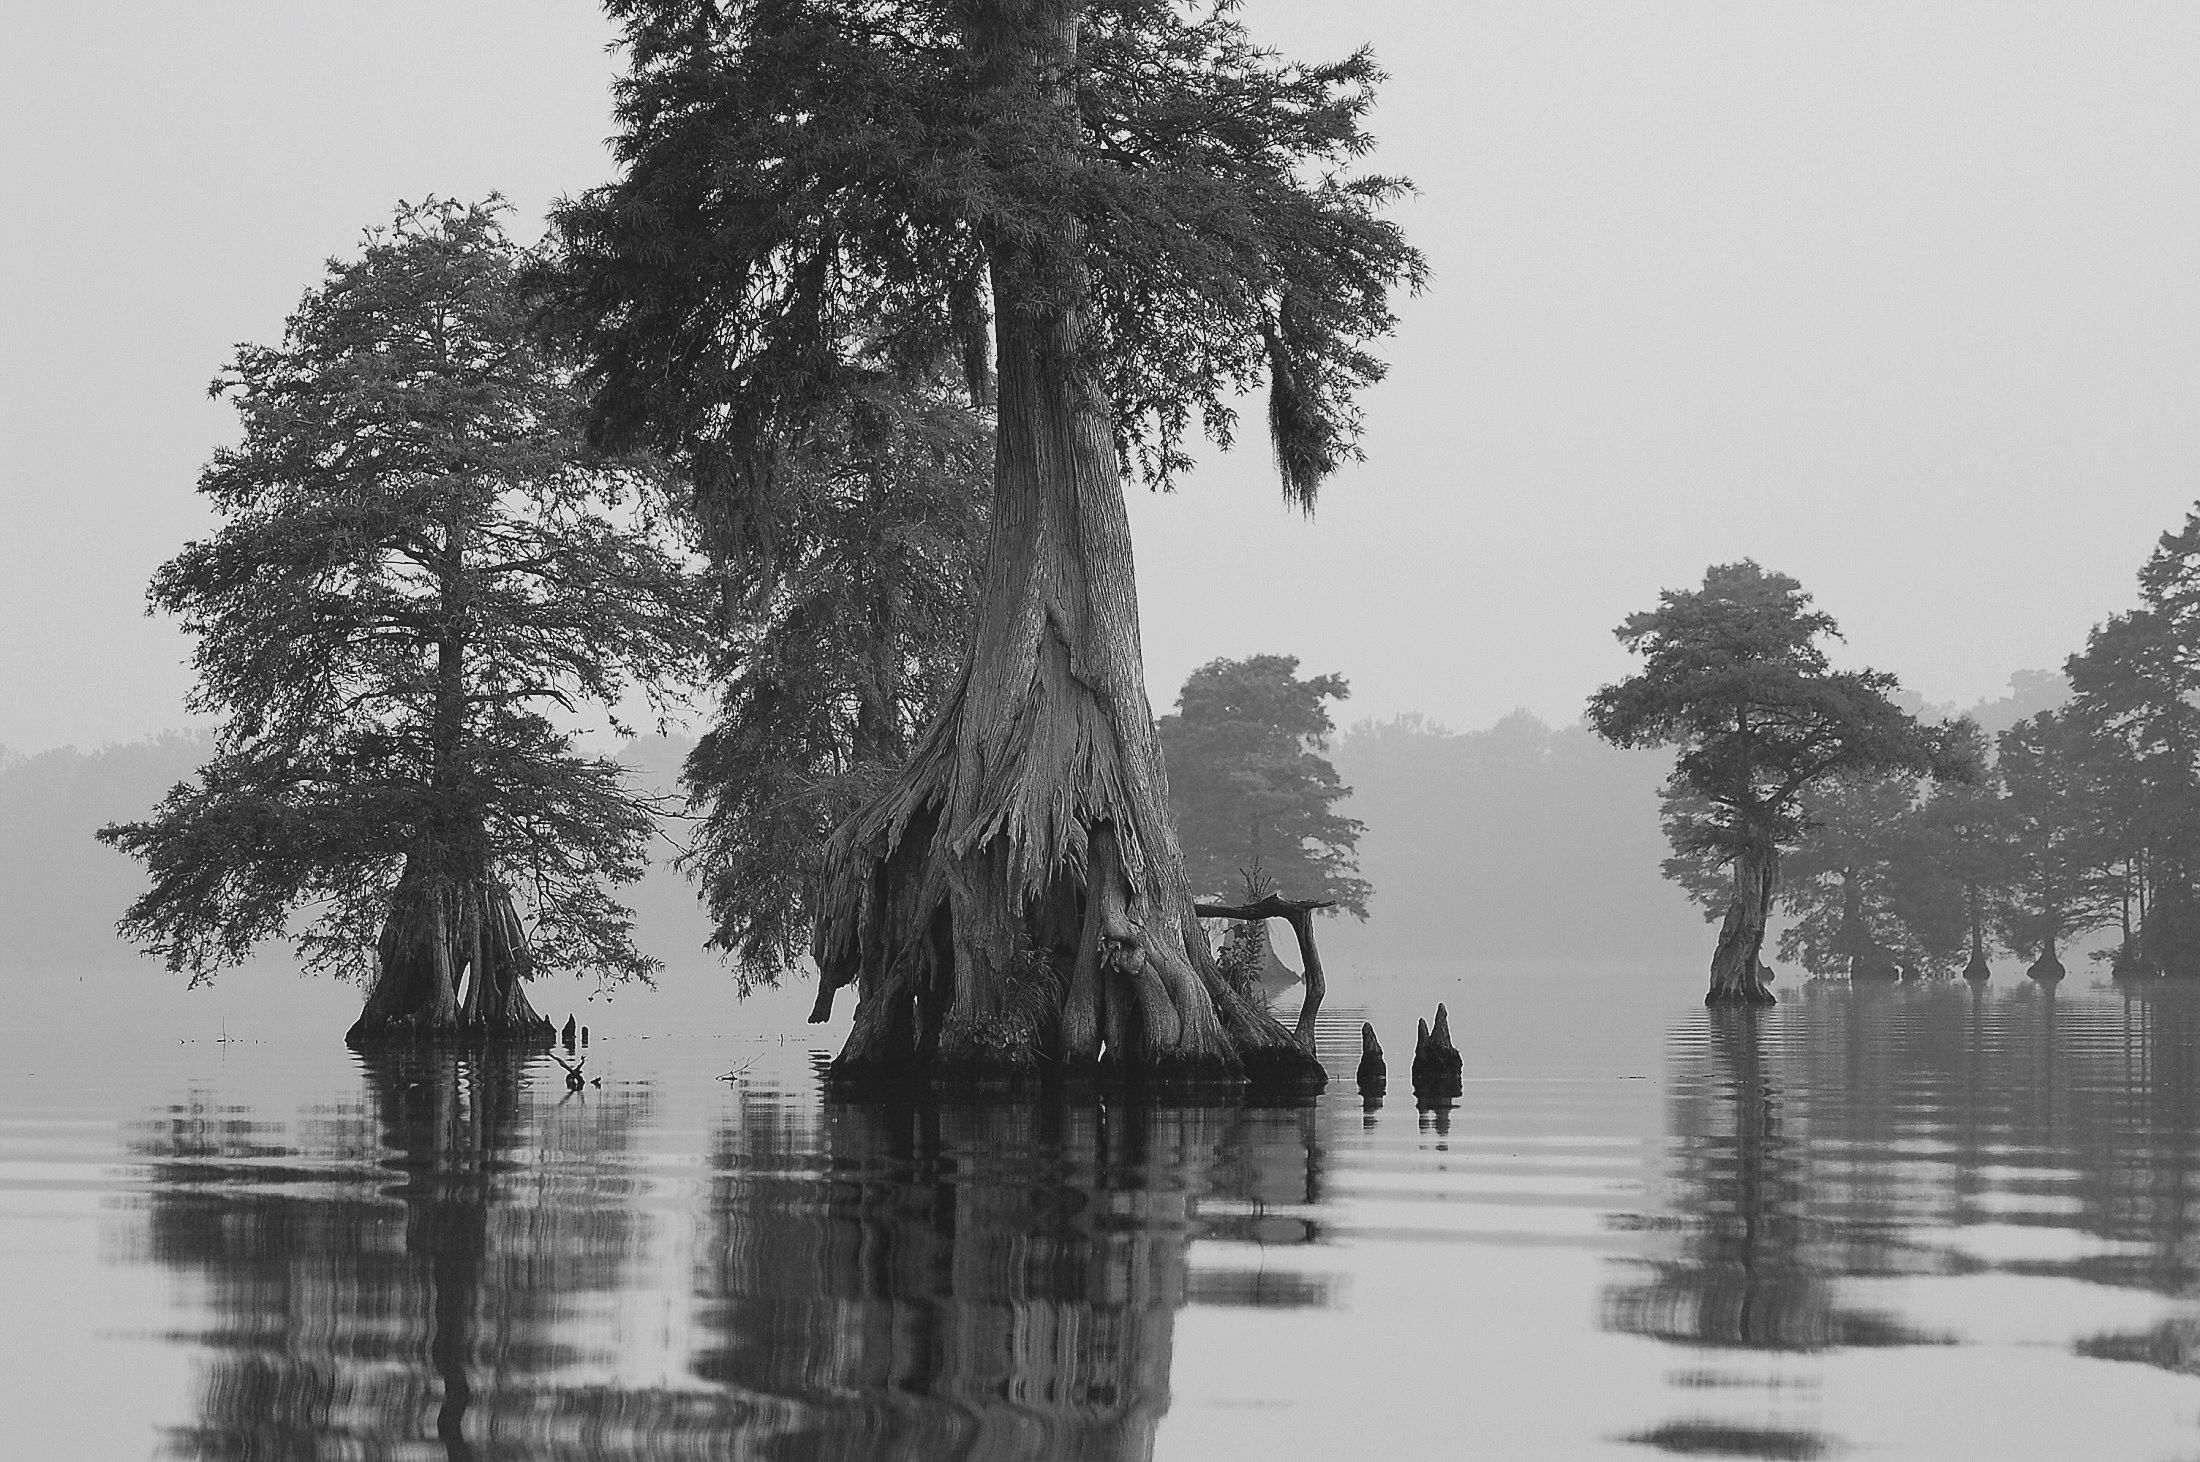 Swamp in morning mist. Image from Pixabay.